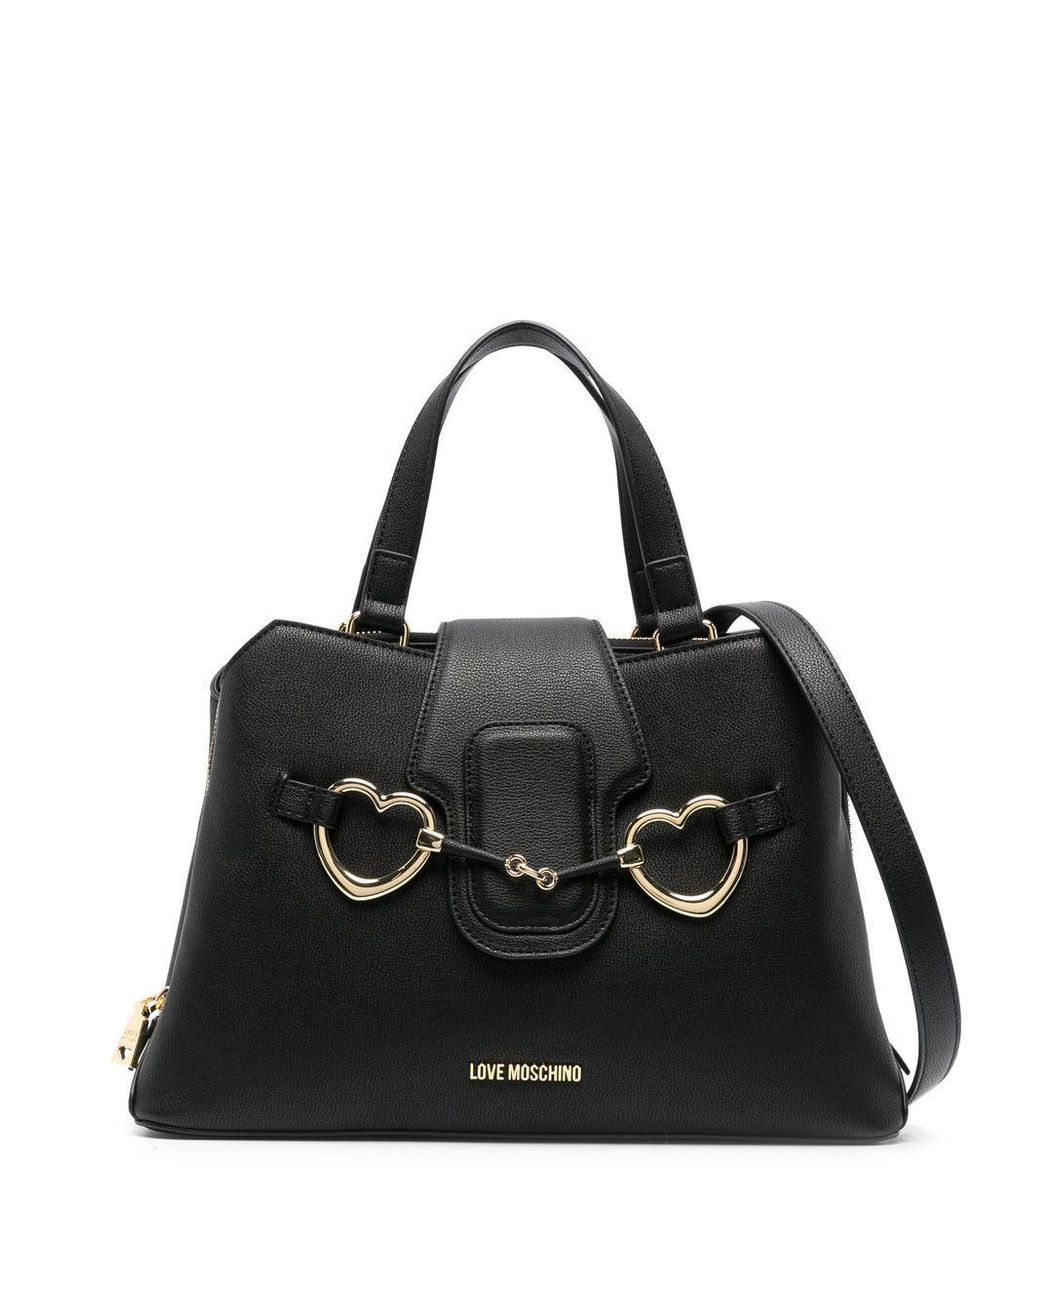 Love Moschino Heart-hardware Faux Leather Tote Bag in Black | Lyst